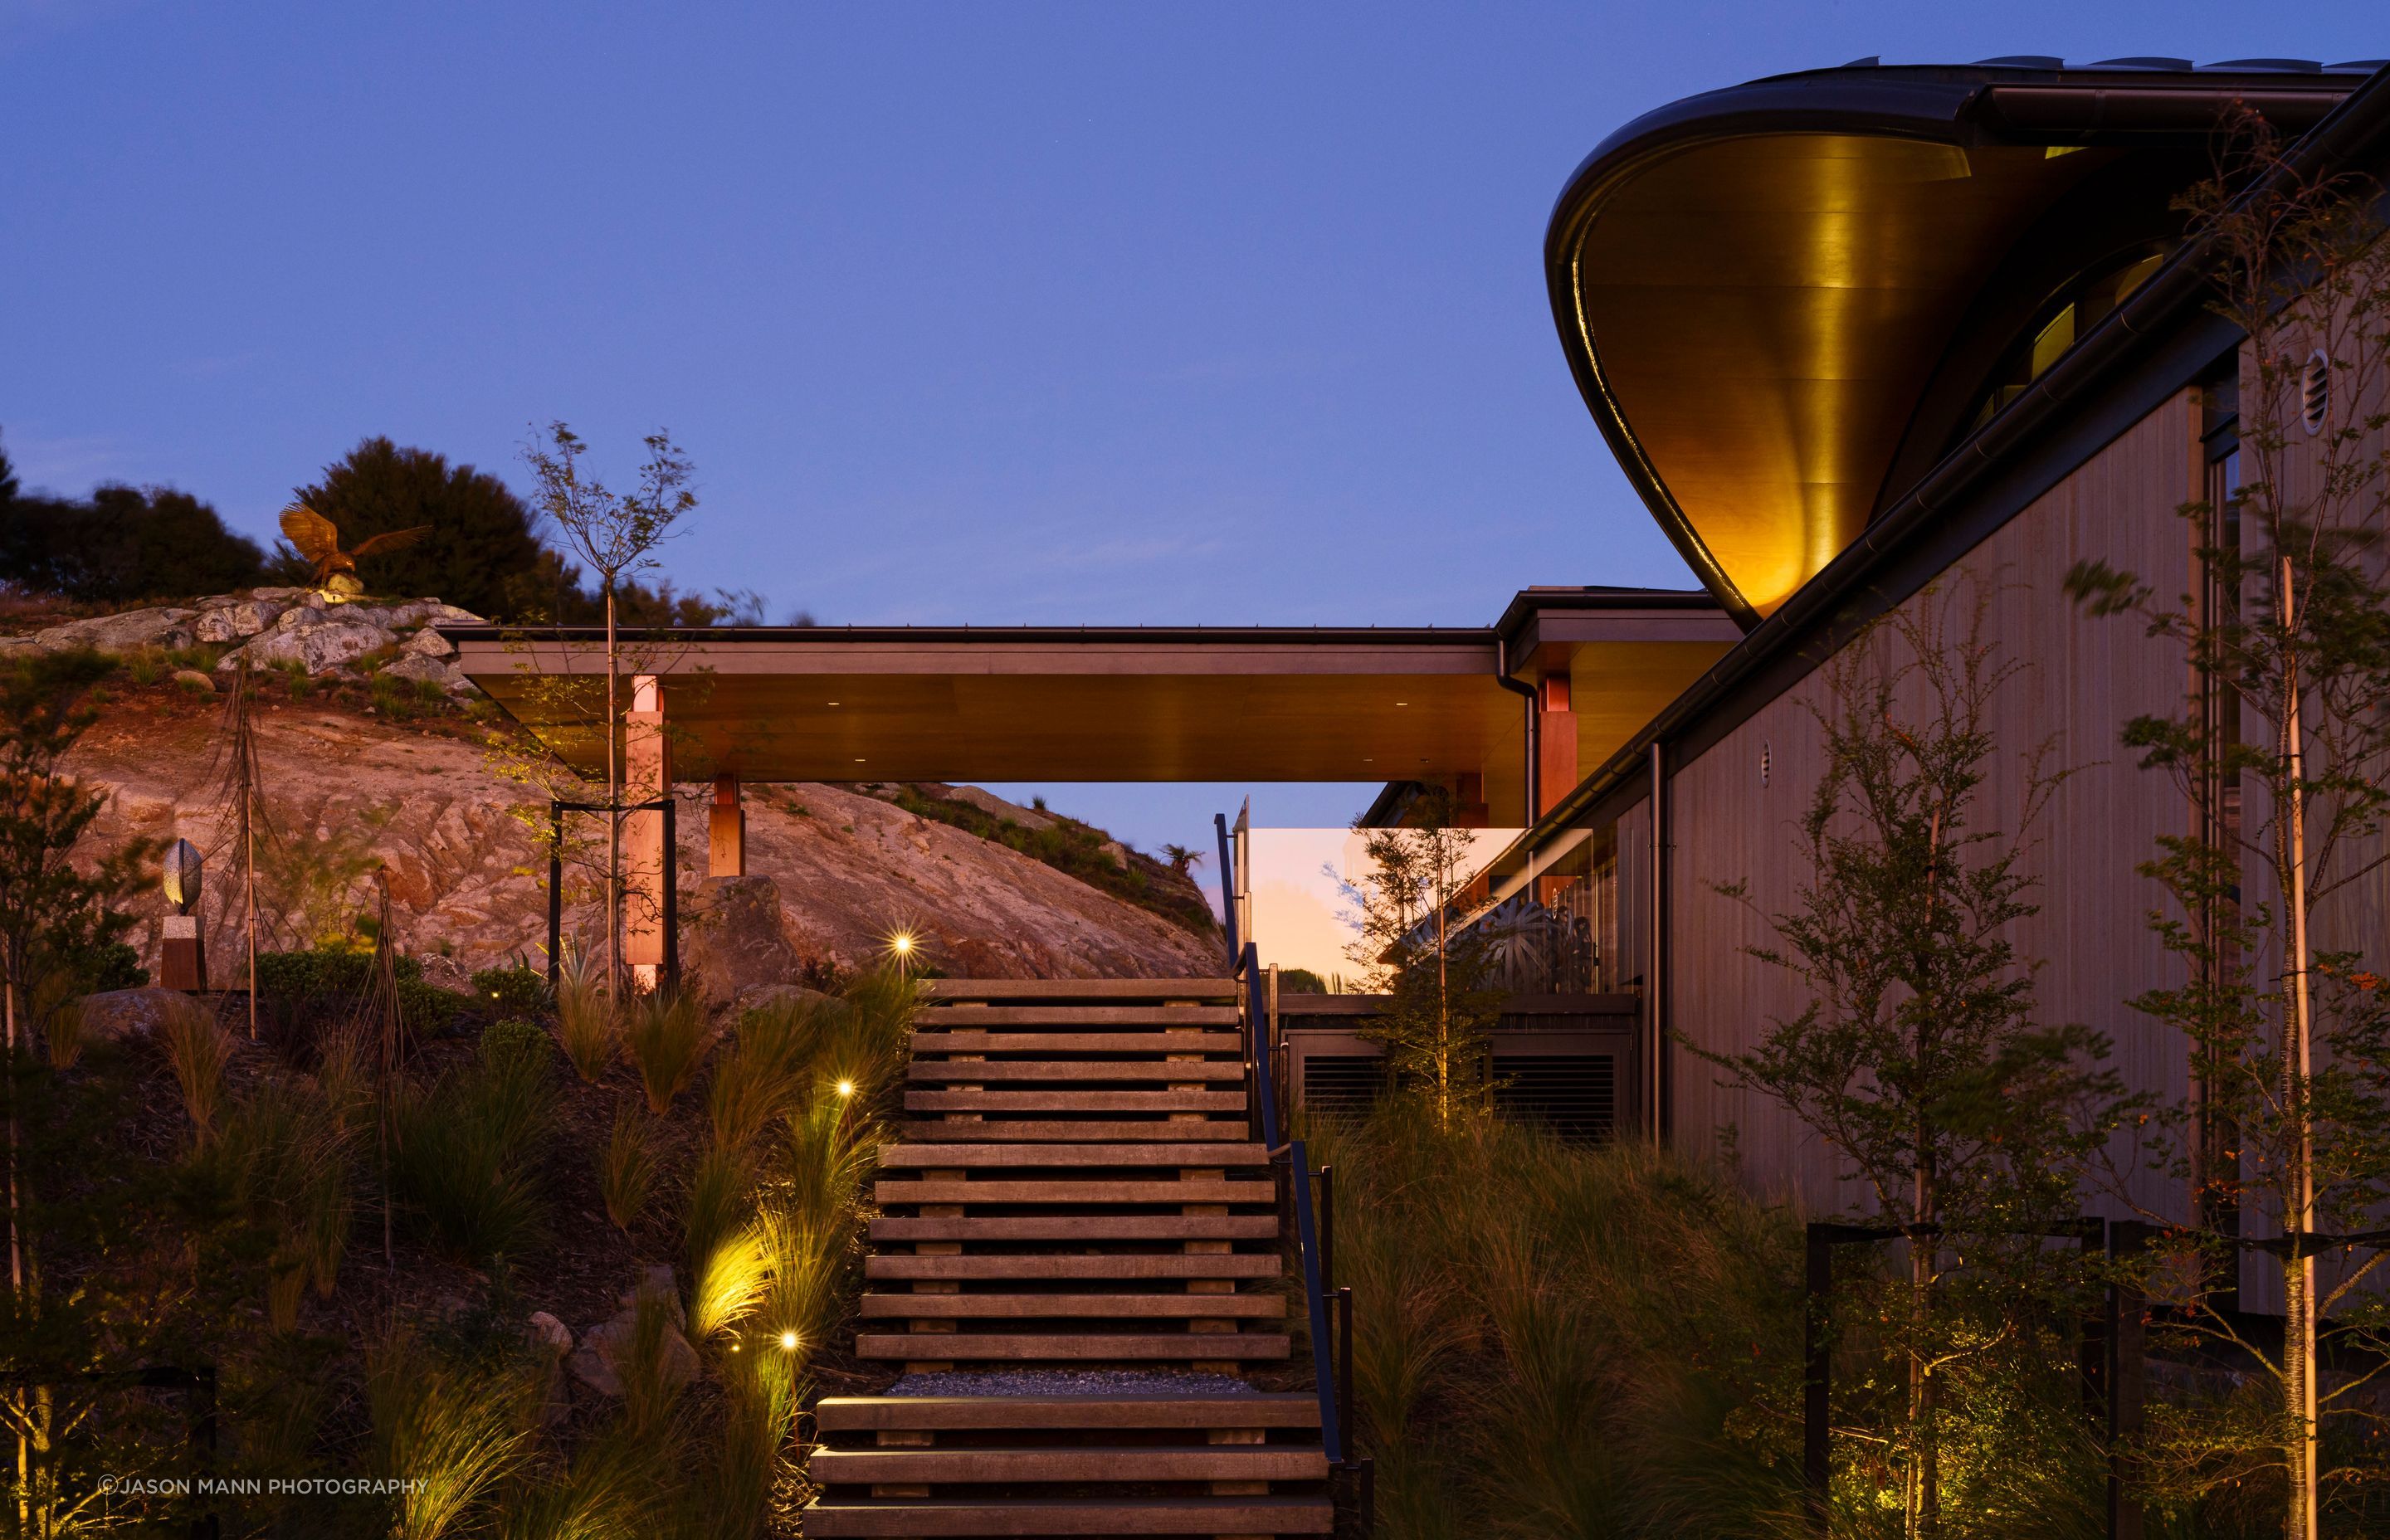 Lighting, like the rest of the landscaping, has been kept minimal so as not to detract from the natural surroundings or the bold architectural detailing of the building.